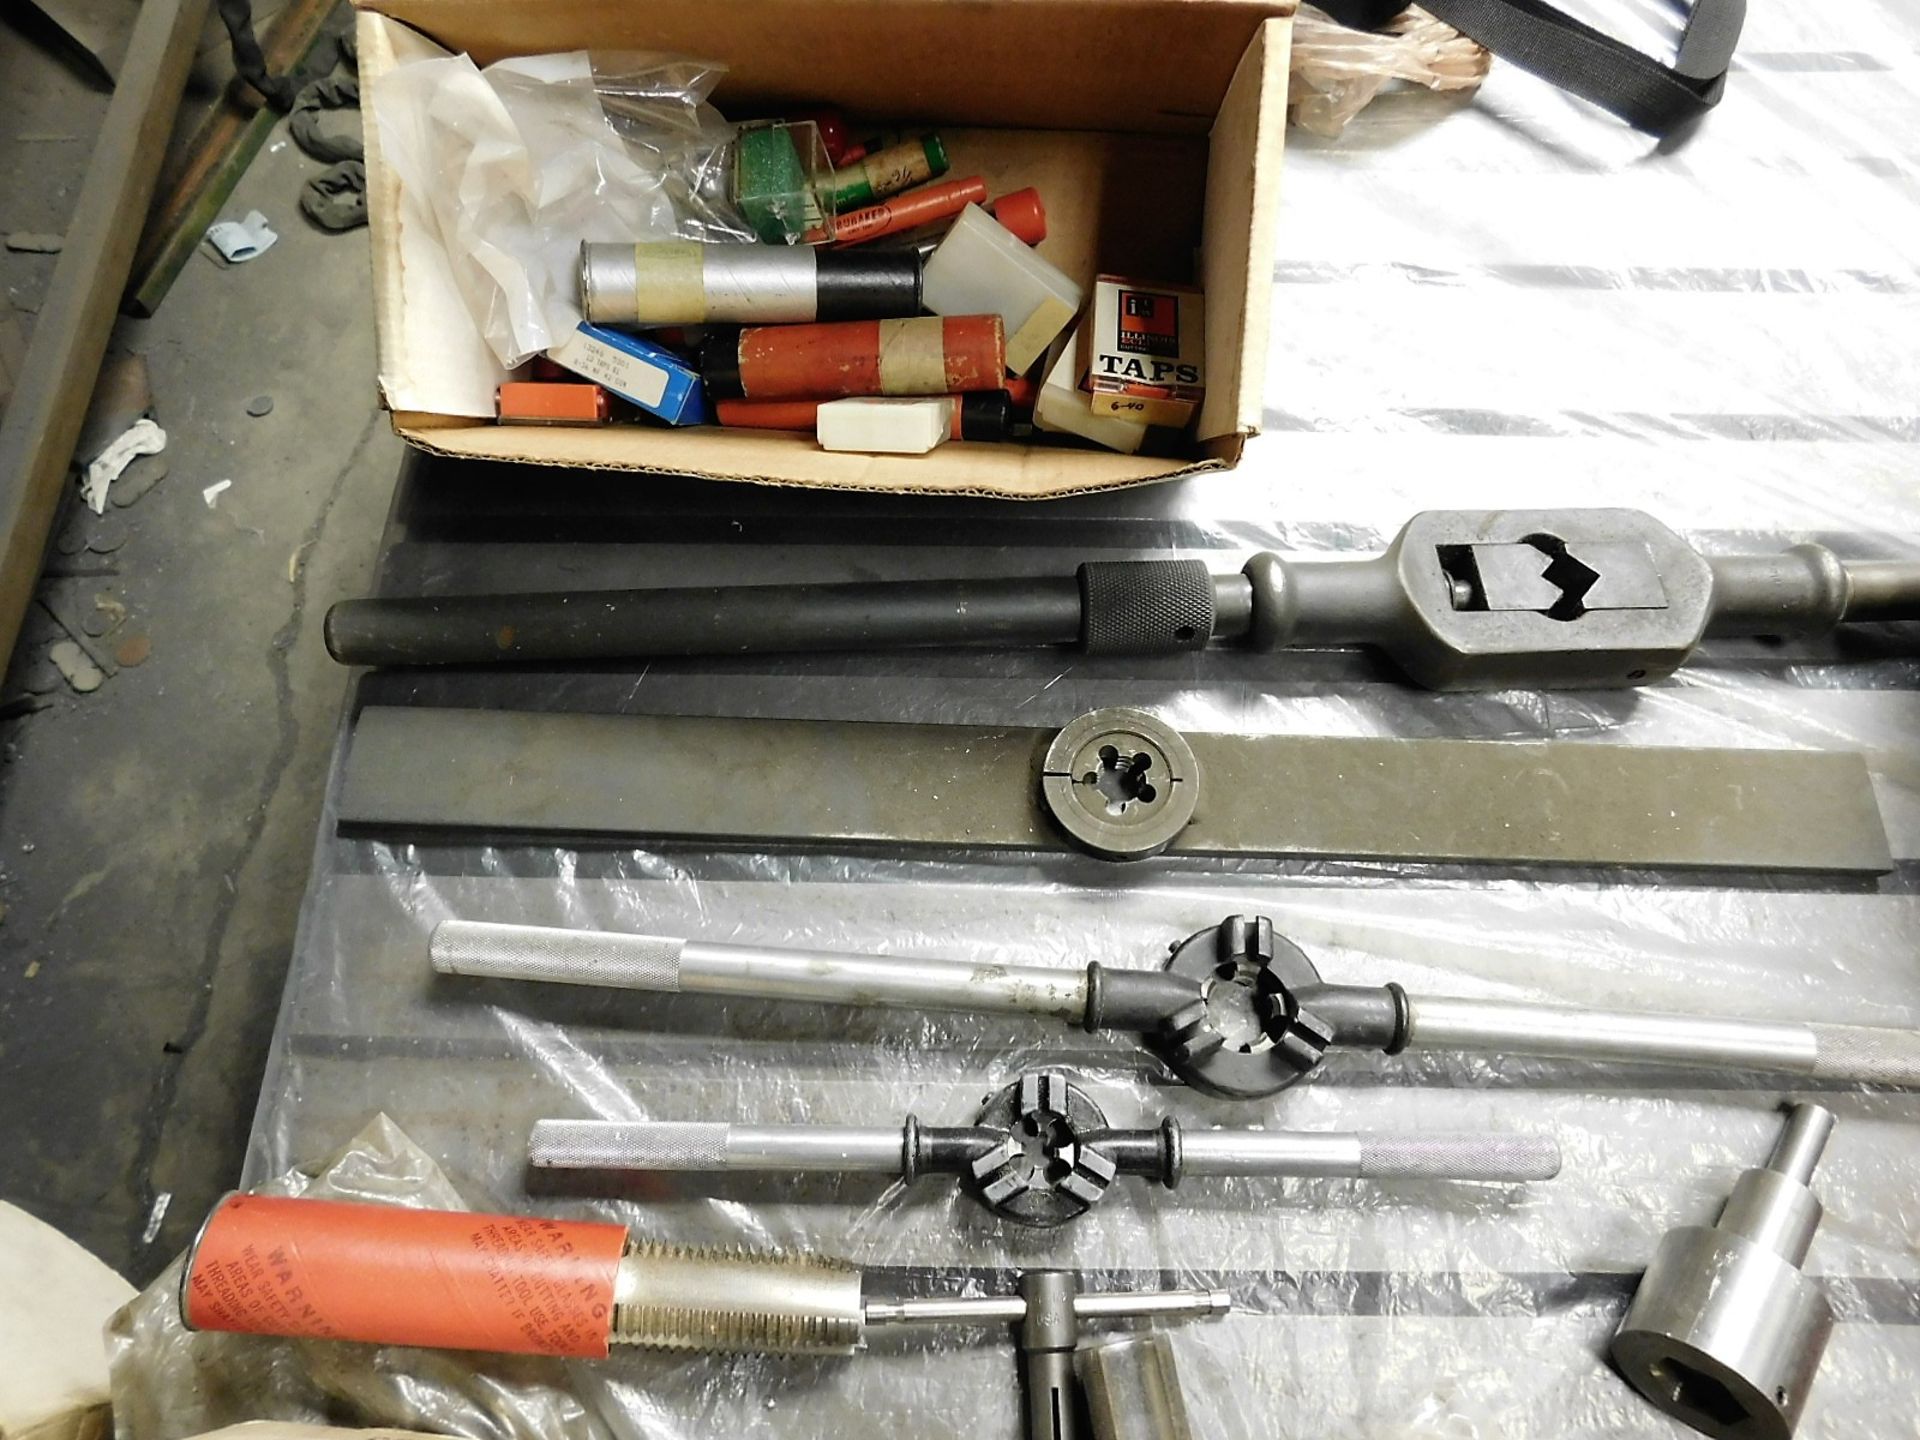 LOT - LARGE QUANTITY OF THREAD TAPS AND DIES, W/ TOOLS, TOO MANY TO LIST - Image 2 of 6